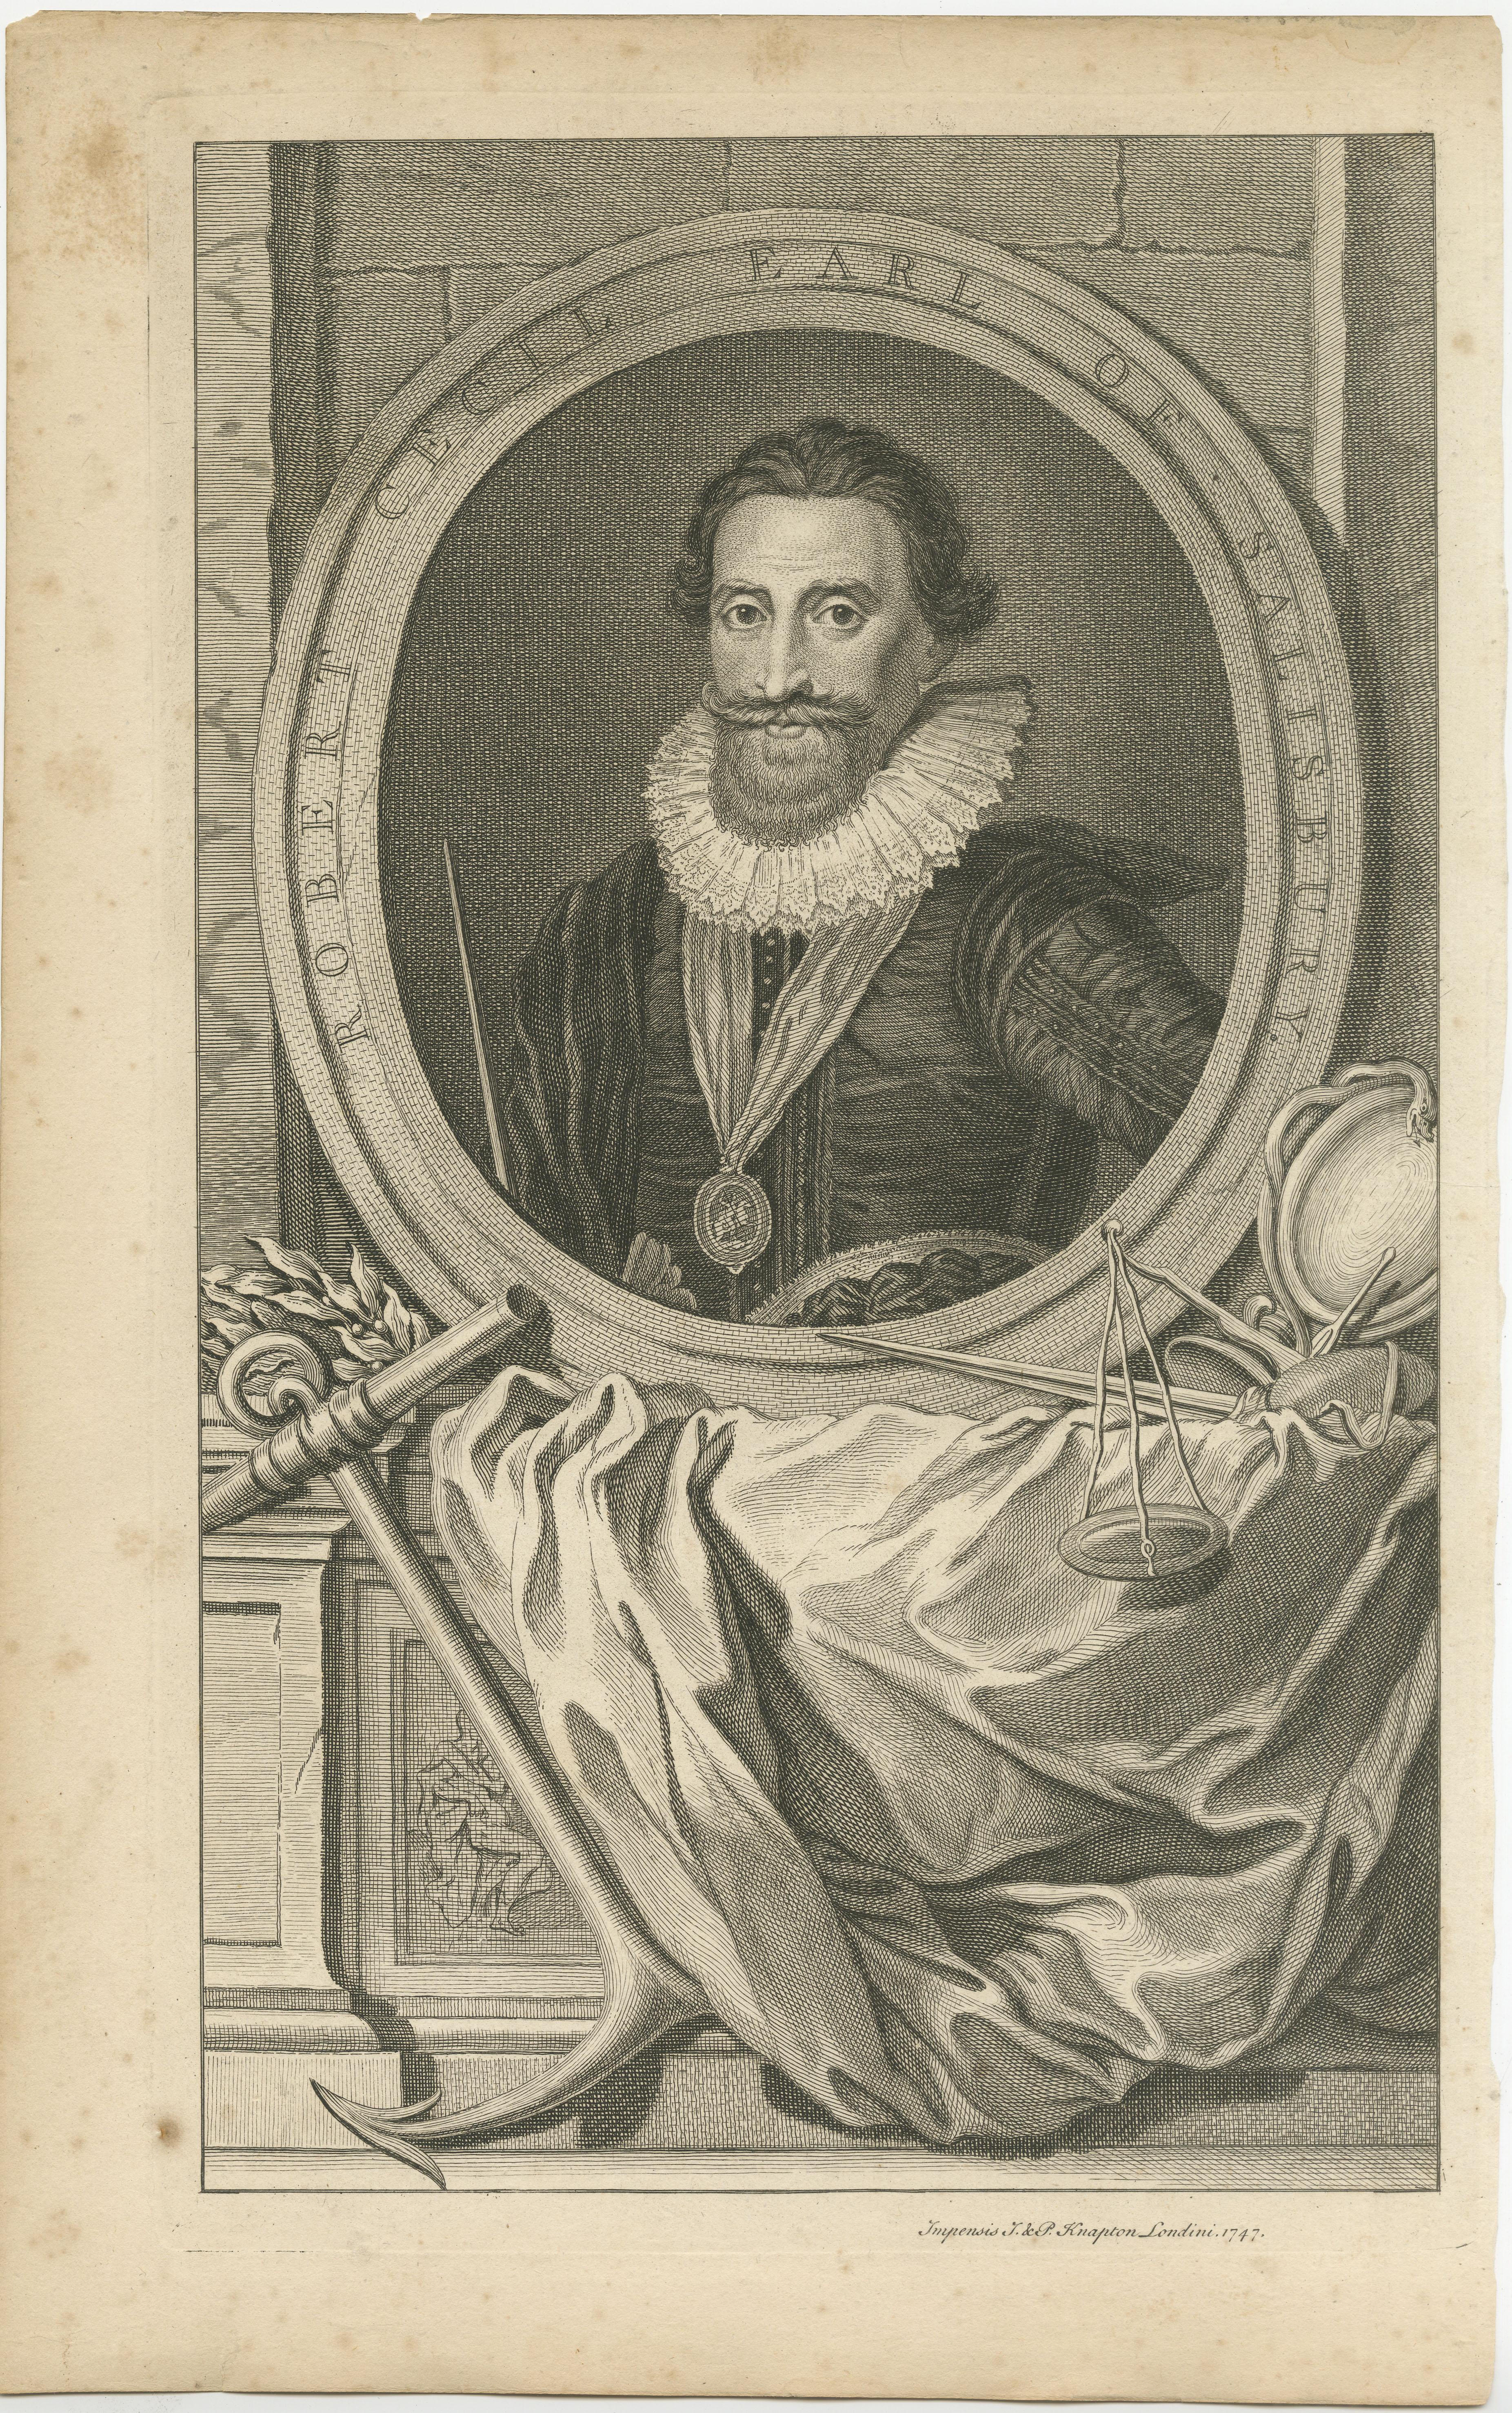 Antique portrait titled 'Robert Cecil Earl of Salisbury'. Robert Cecil, 1st Earl of Salisbury, KG, PC (1 June 1563 – 24 May 1612), was an English statesman noted for his direction of the government during the Union of the Crowns, as Tudor England